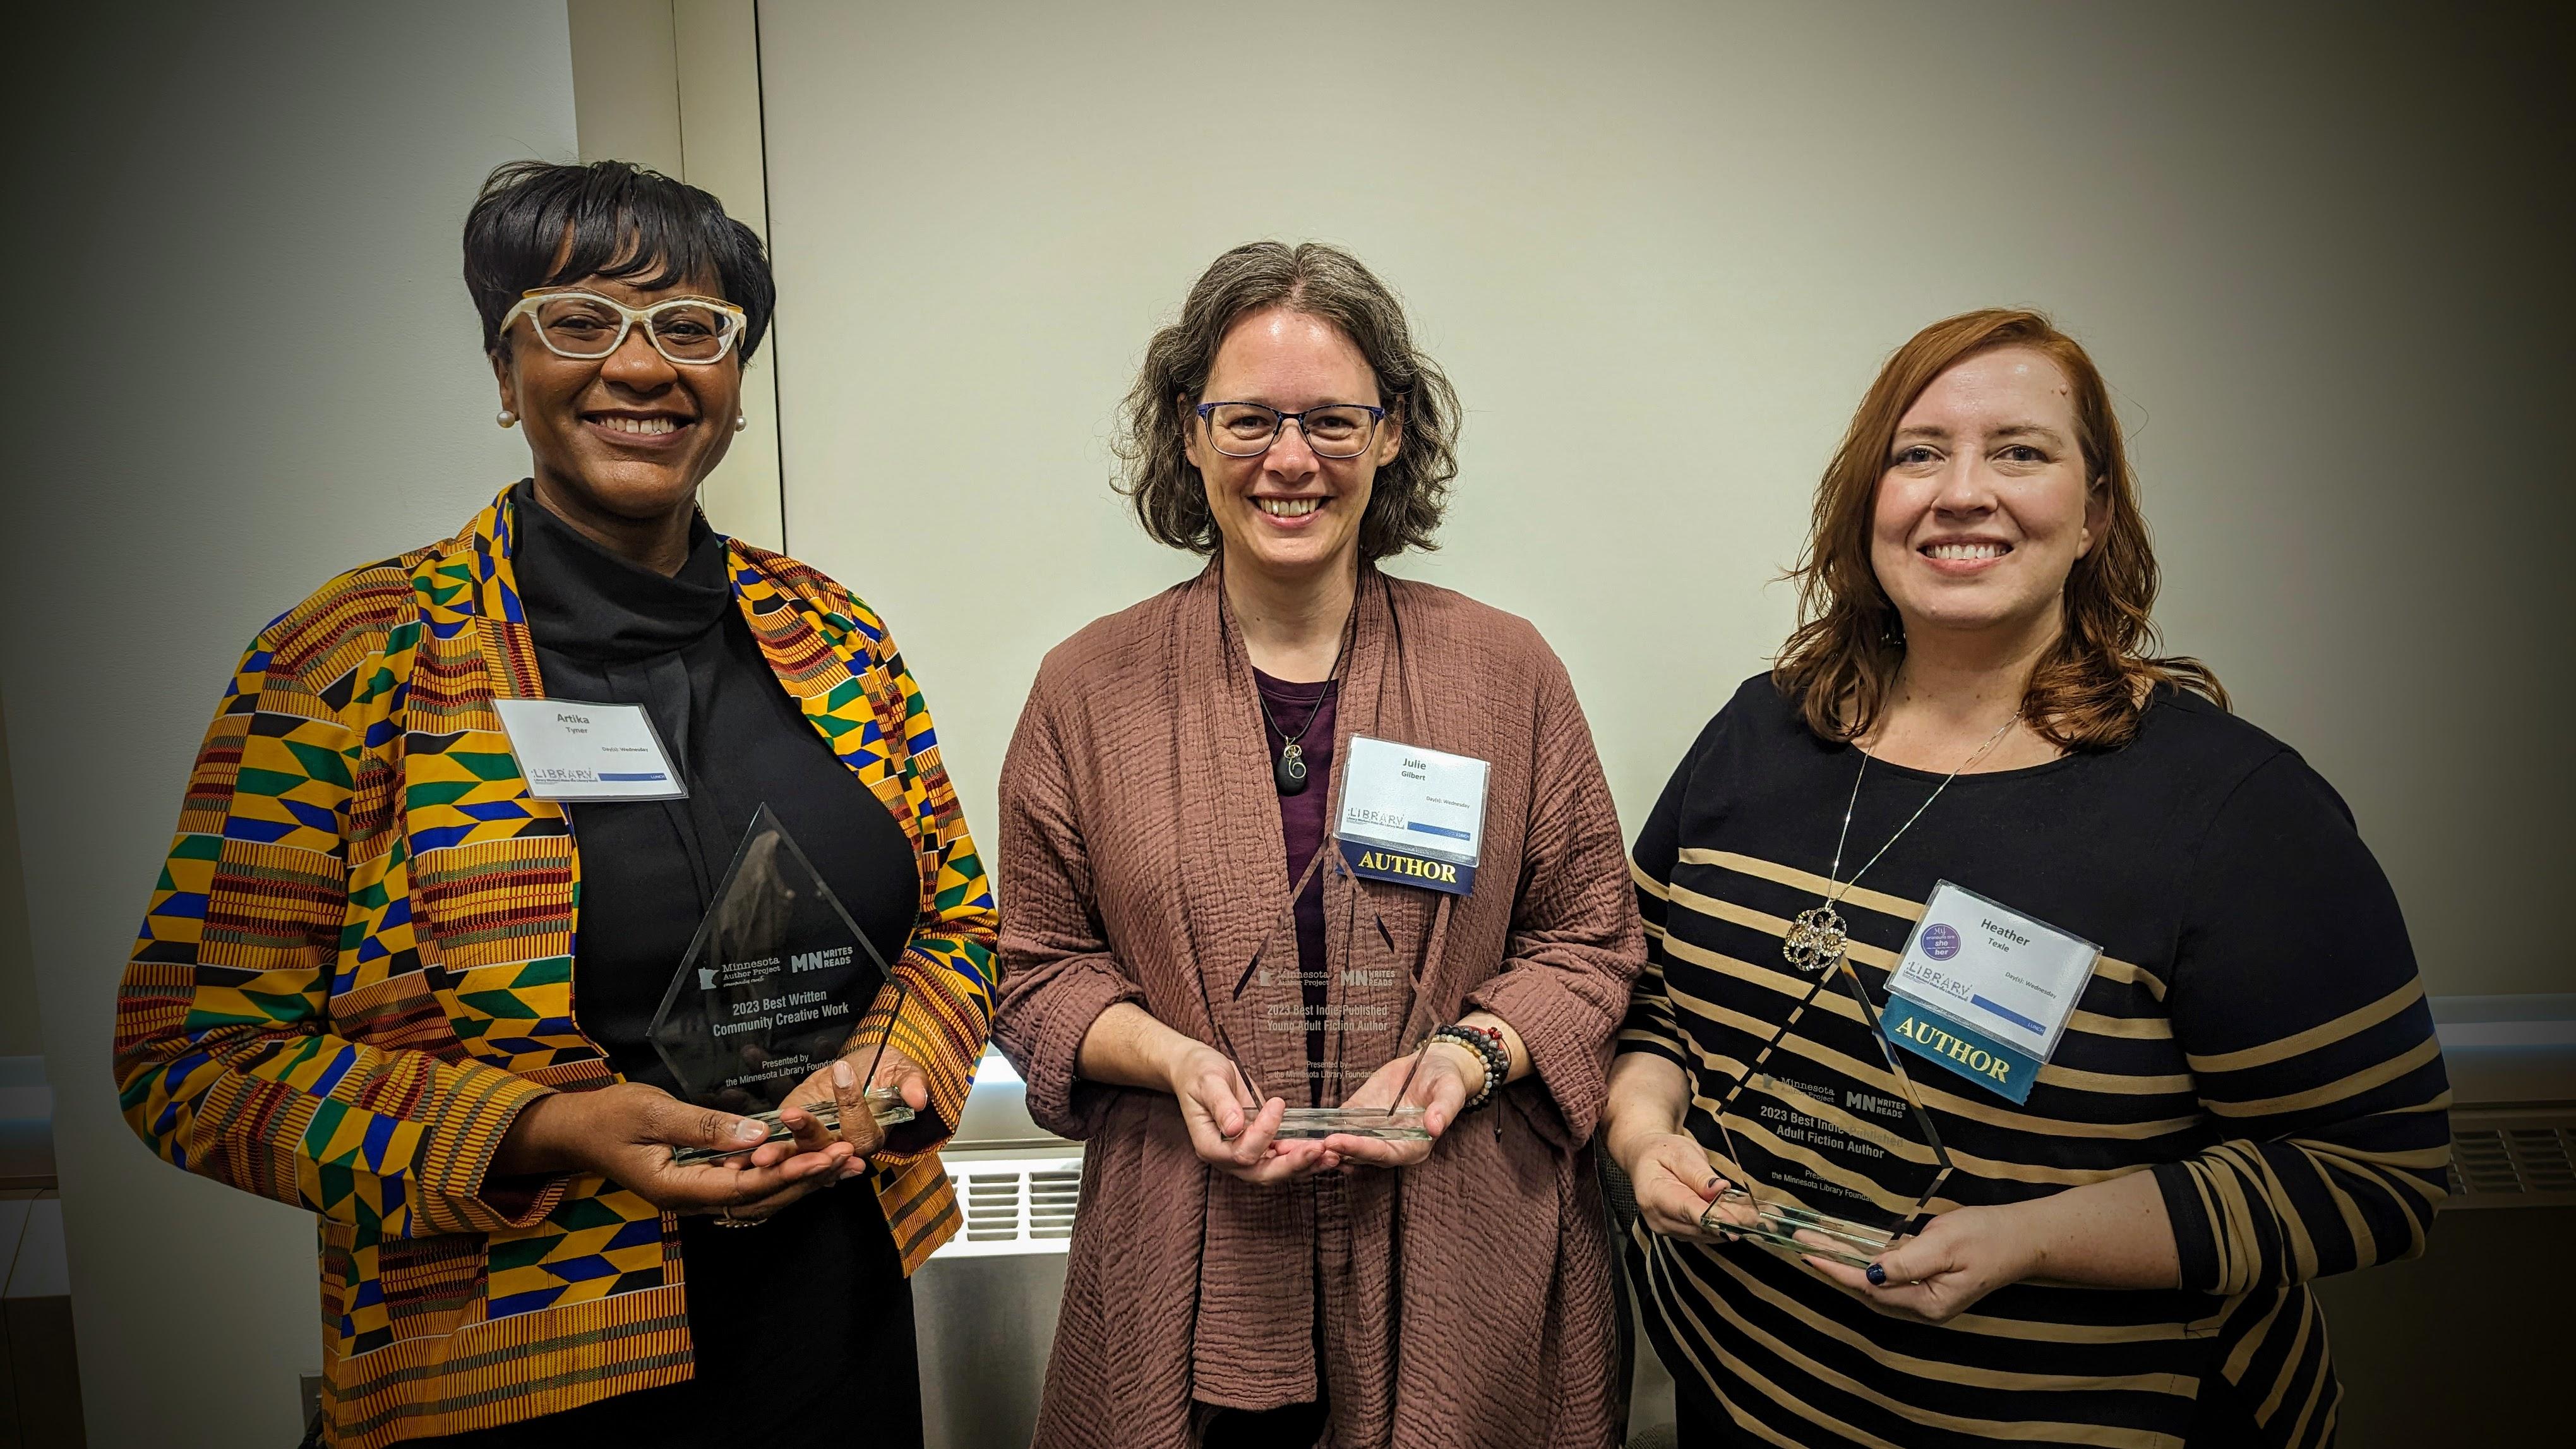 Artika Tyner, Julie Gilbert, and Heather Texle pose with their Minnesota Author Project awards.